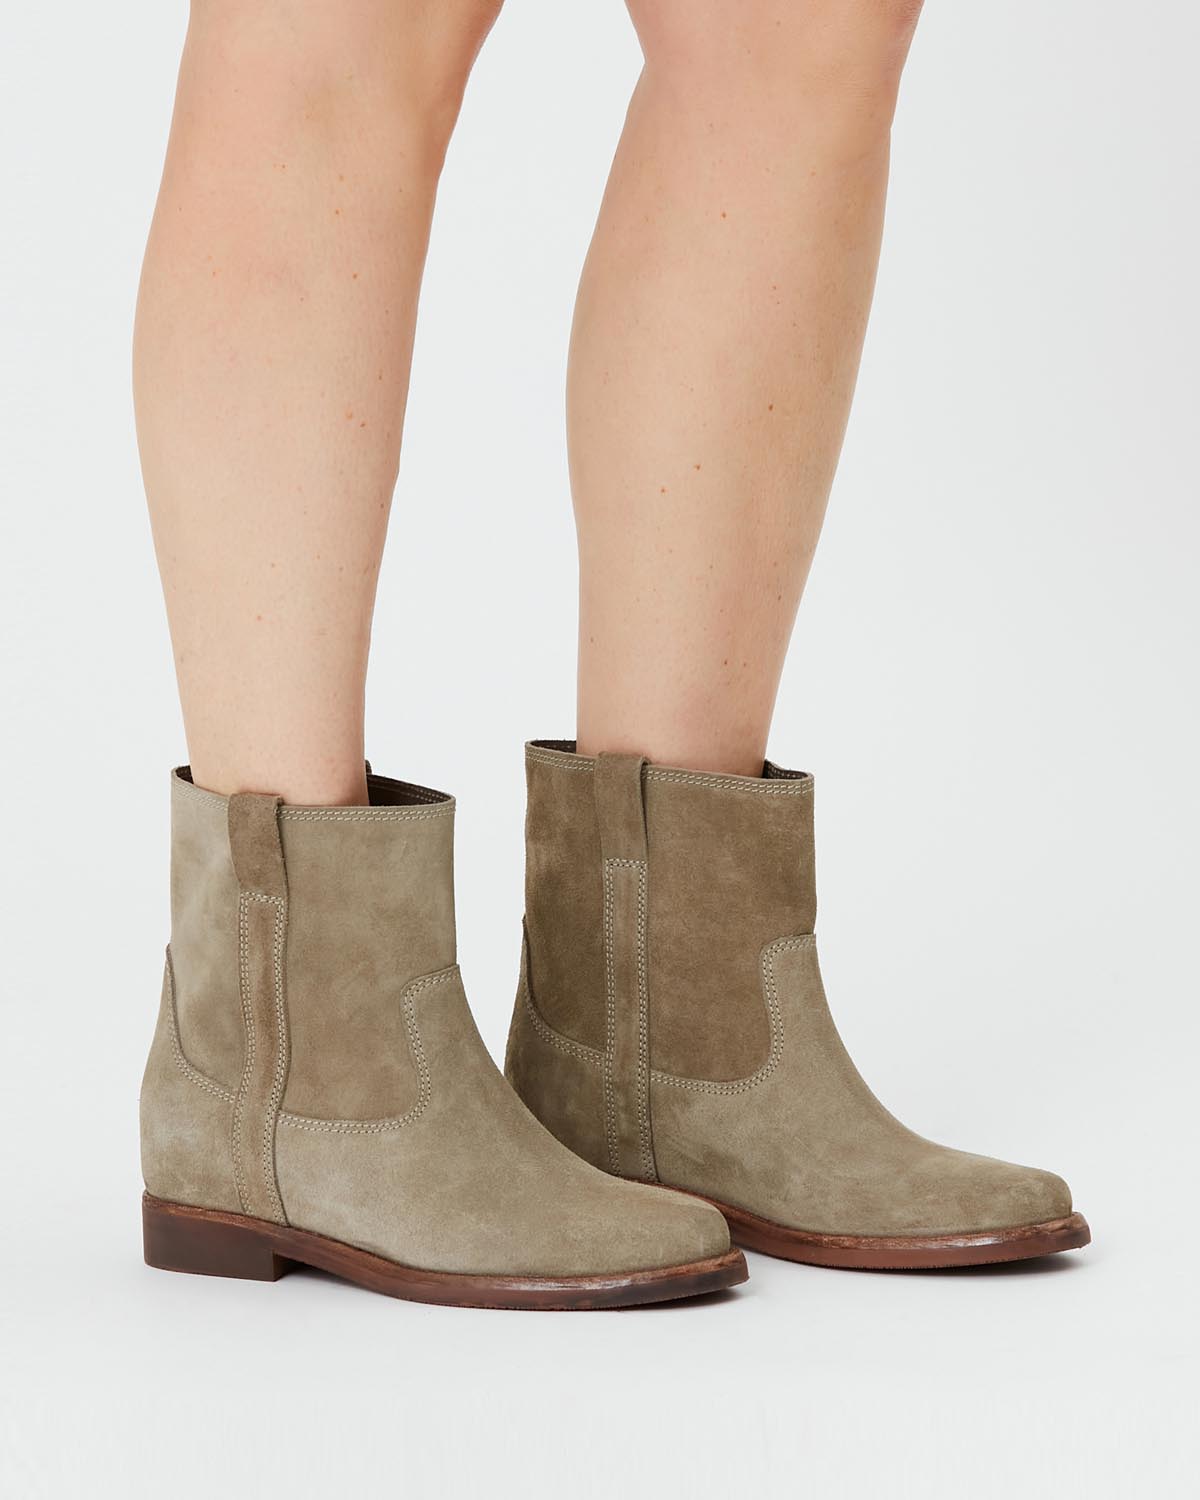 Boots susee Woman Taupe 5